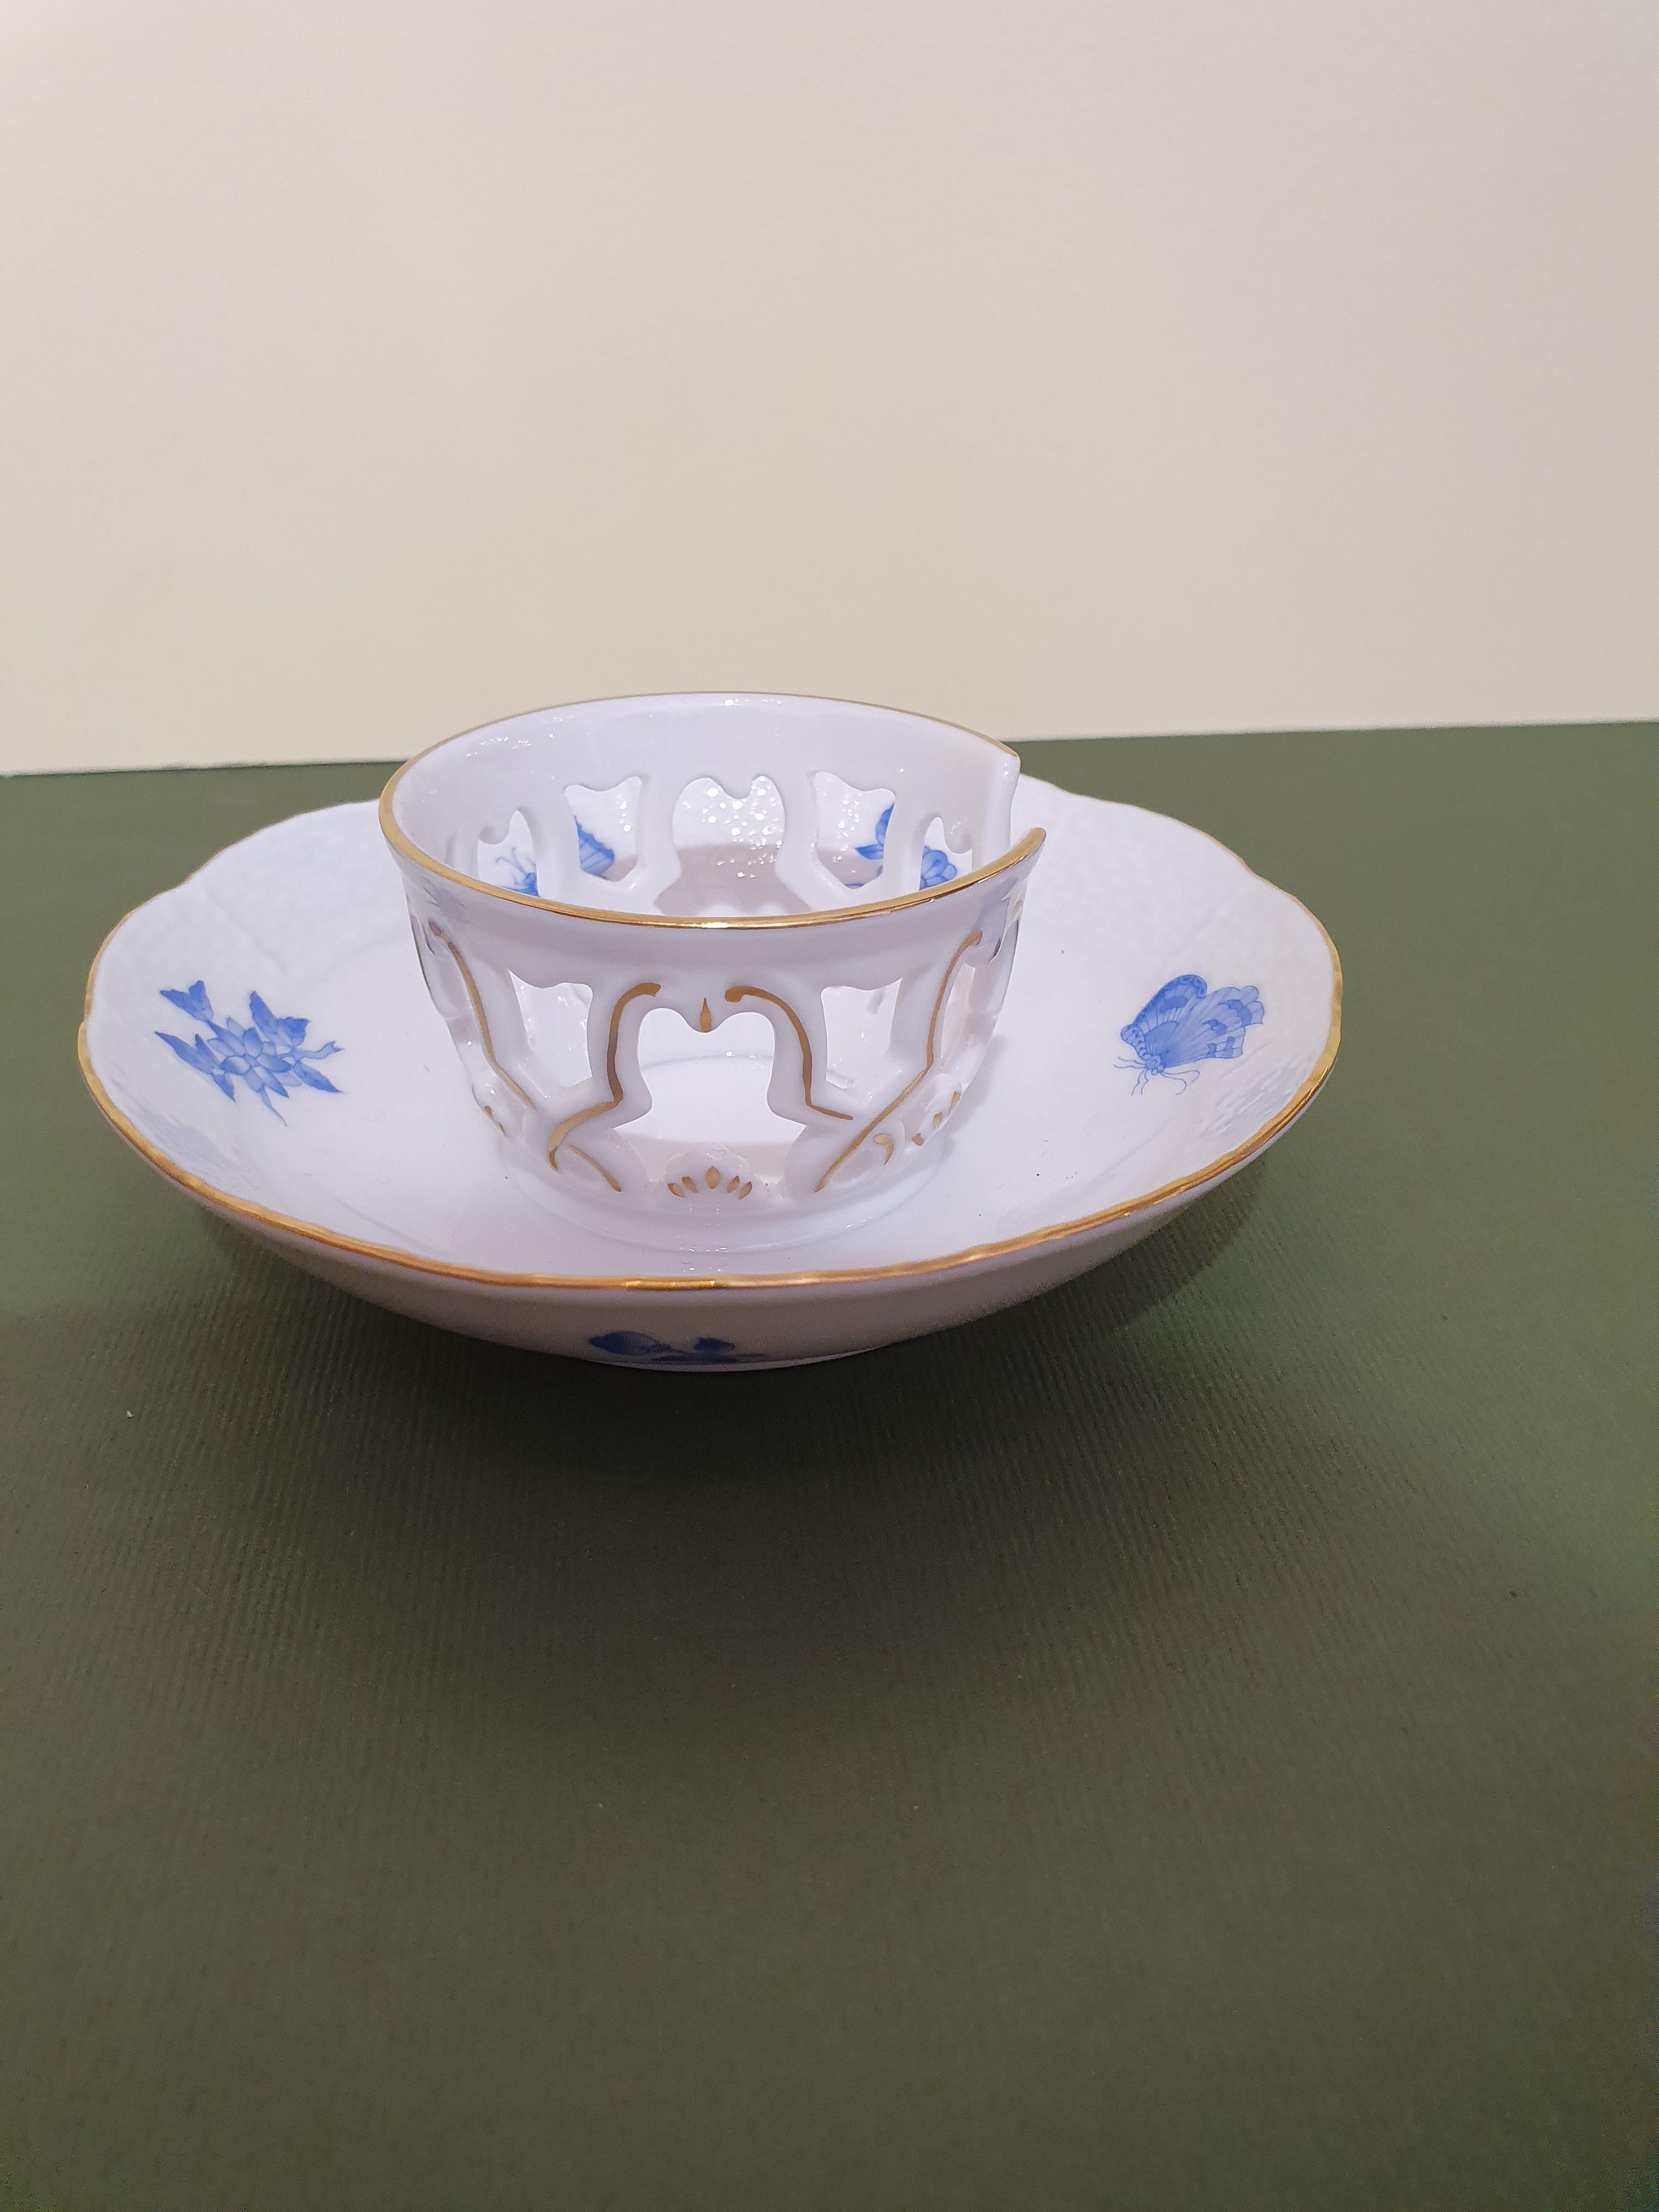 An iconic set hand painted in blue flowers and butterflies, gold rimmed.
Gorgeous the carved saucers under the cups
The Victoria decor is one of the most important of Herend since it was chosen by the great Queen Victoria in 1851 during the